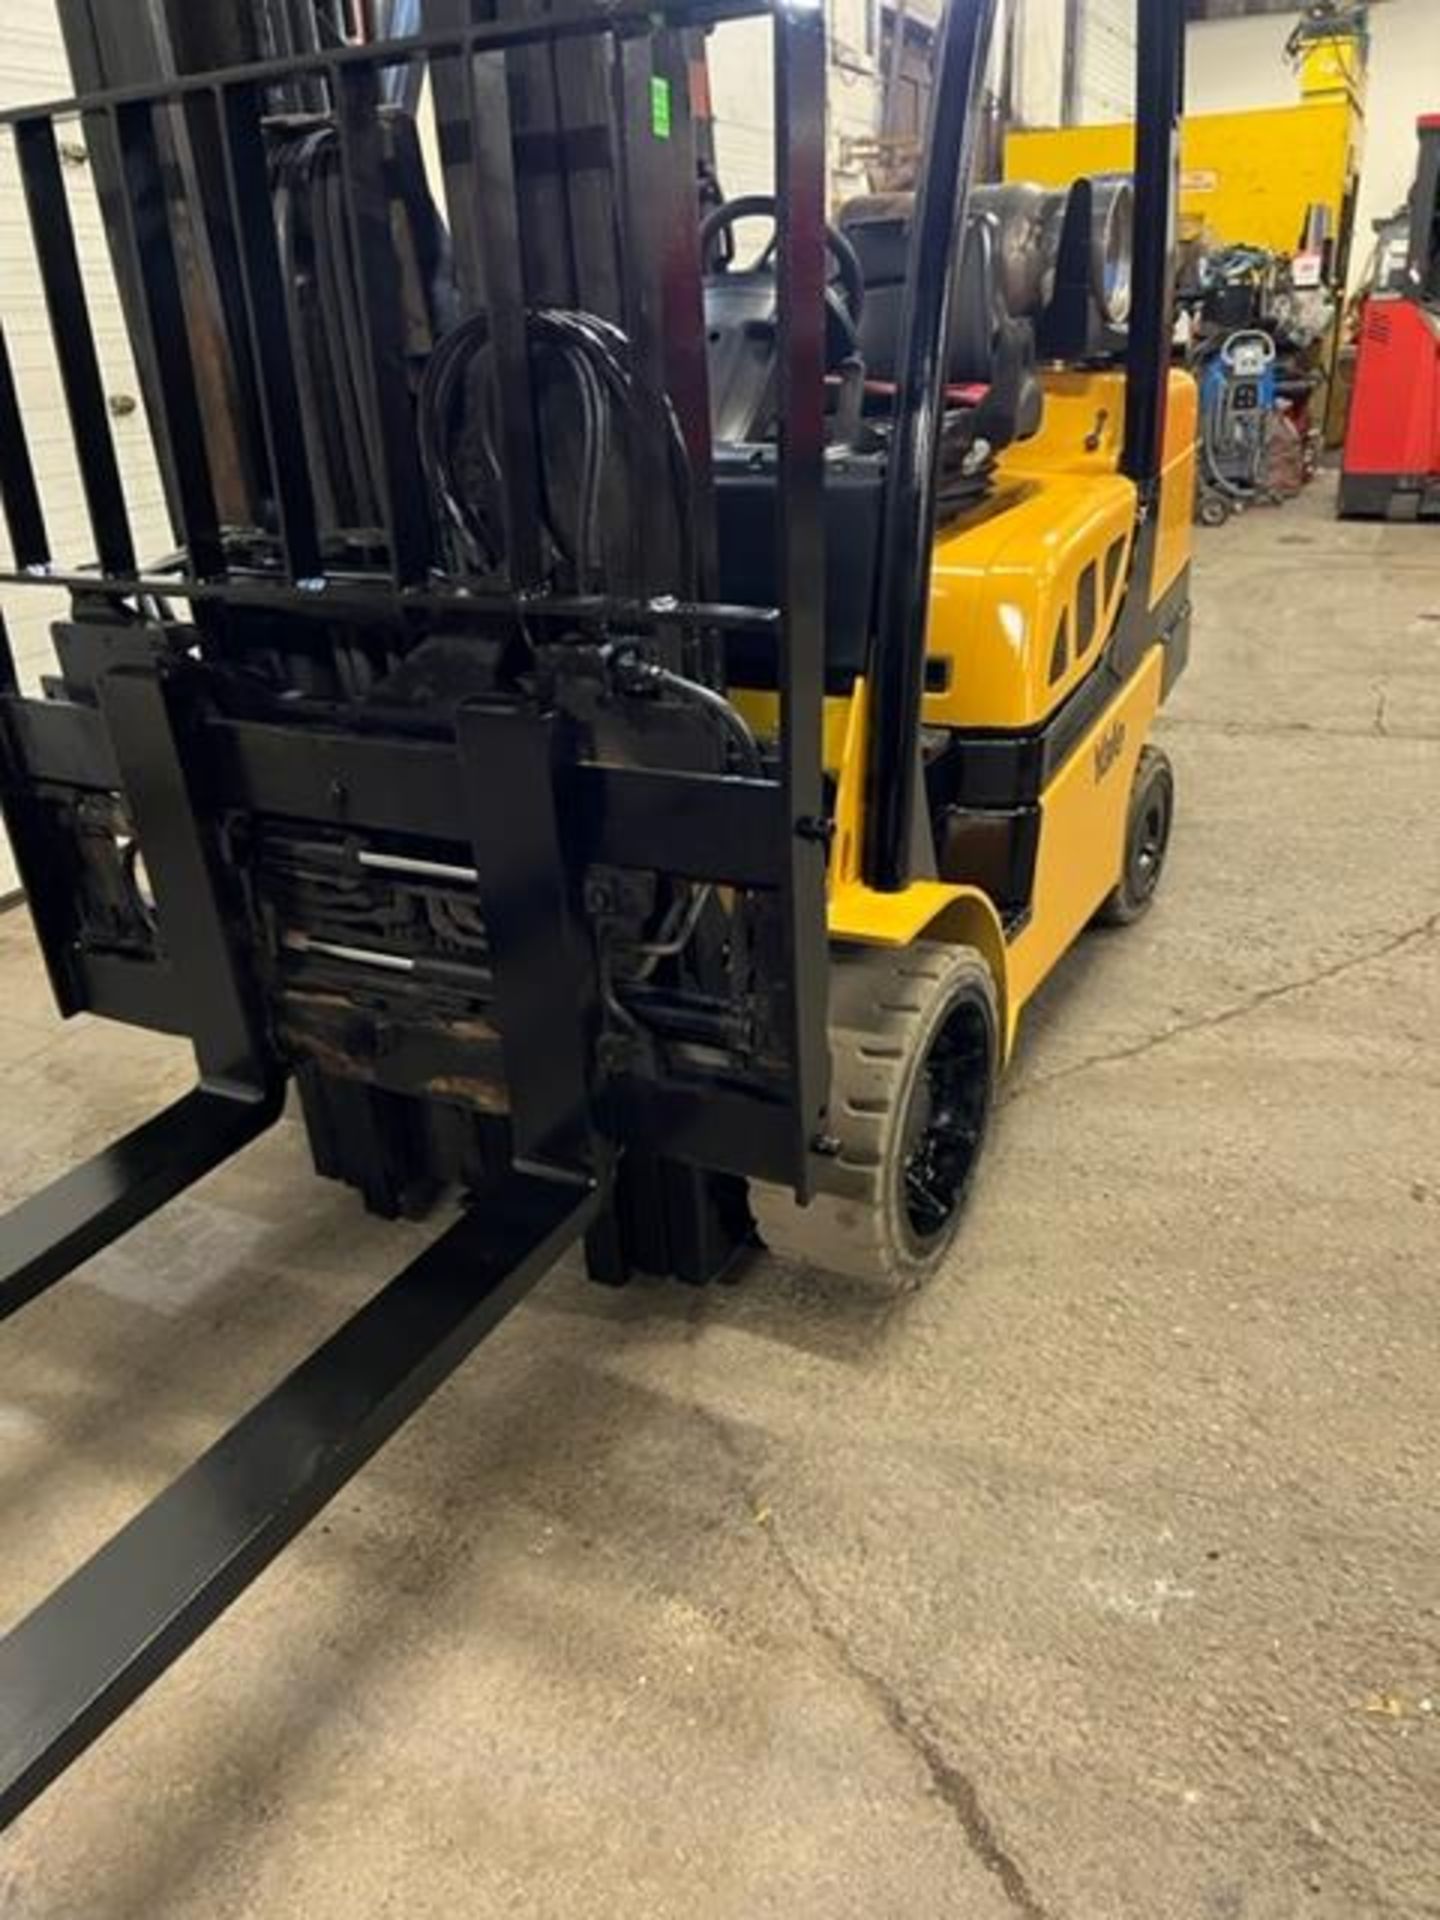 FREE CUSTOMS - NICE 2018 Yale model 80 - 8,000lbs Capacity Forklift LPG (propane) with 54" forks - Image 3 of 4